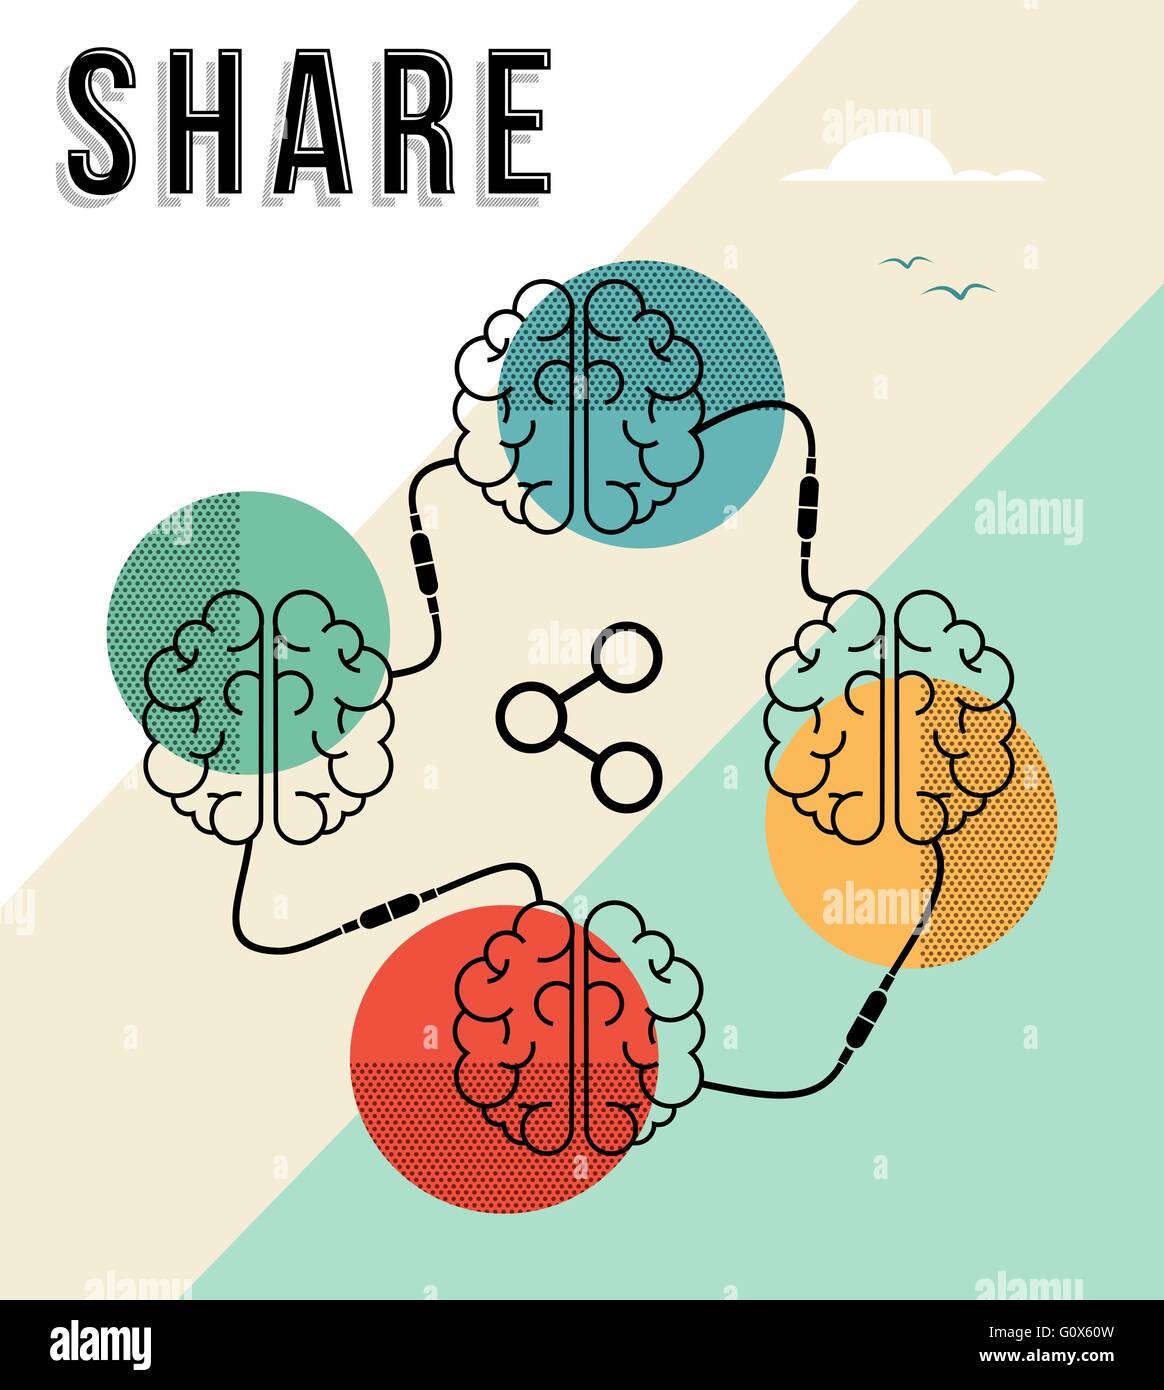 Share concept illustration, human brains share knowledge and information in modern flat line art style. EPS10 vector. Stock Vector